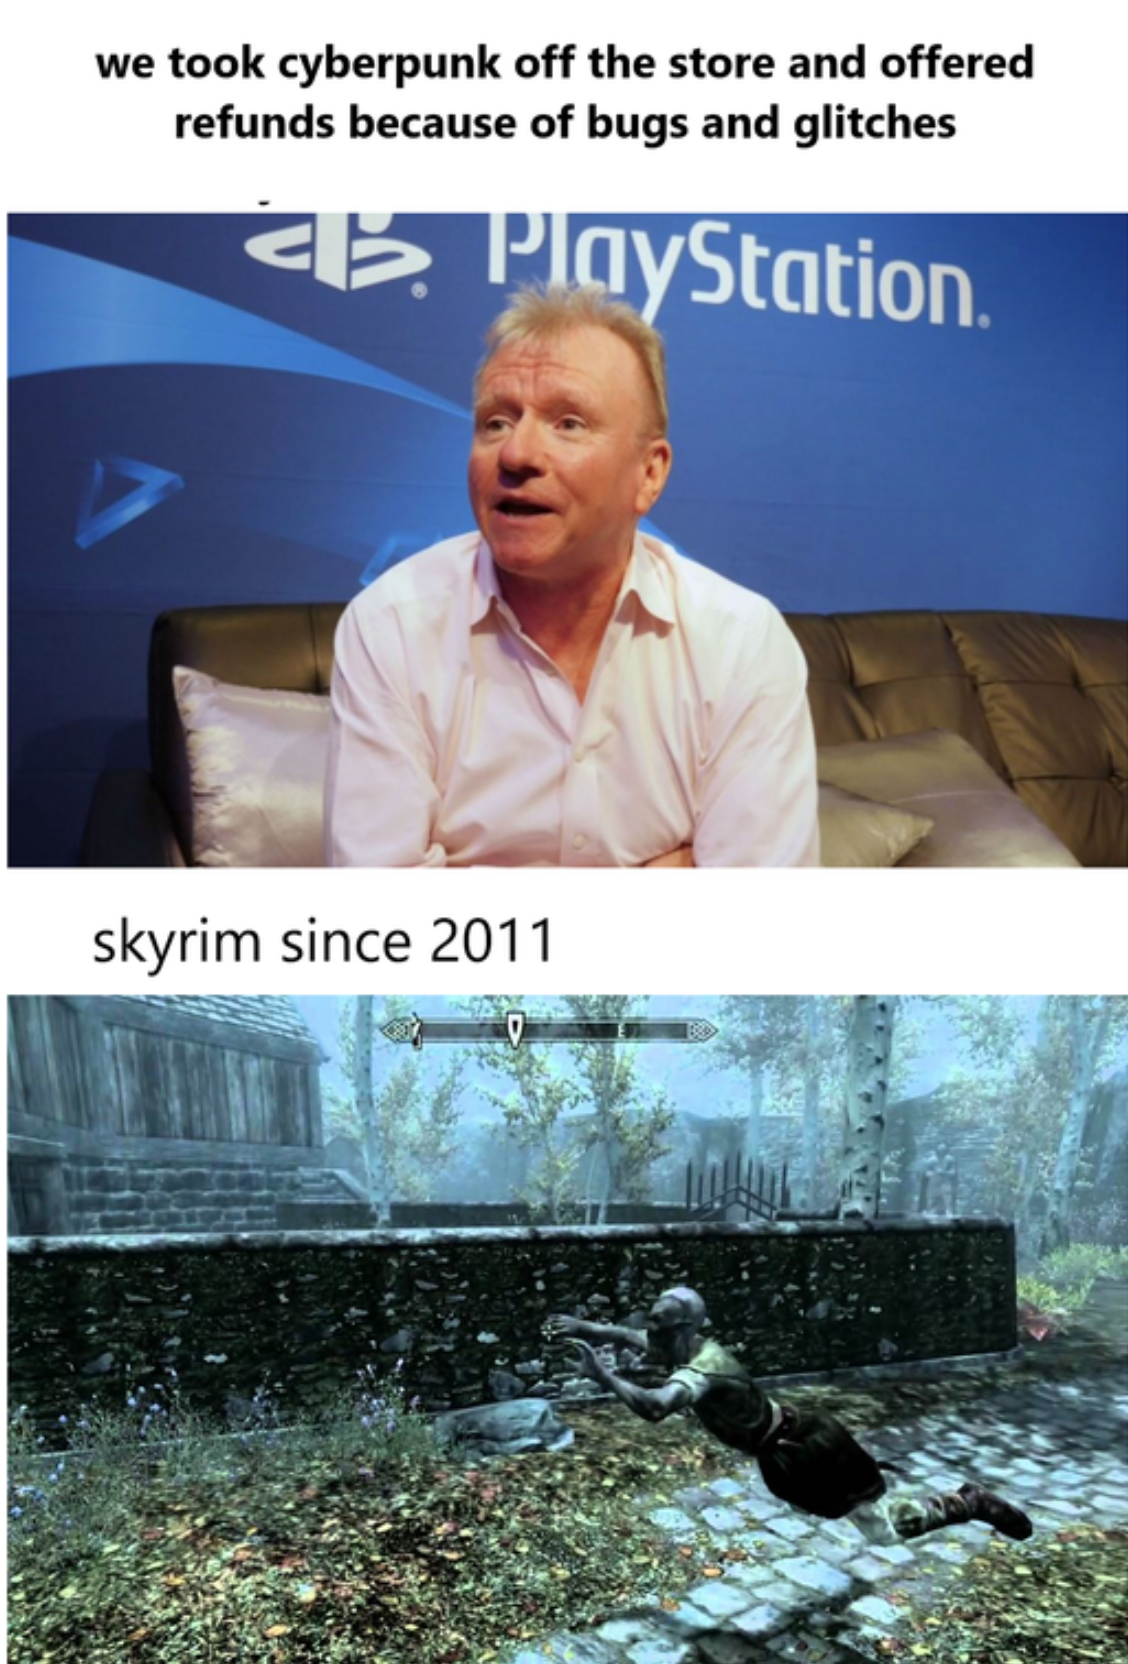 water - we took cyberpunk off the store and offered refunds because of bugs and glitches b. PlayStation skyrim since 2011